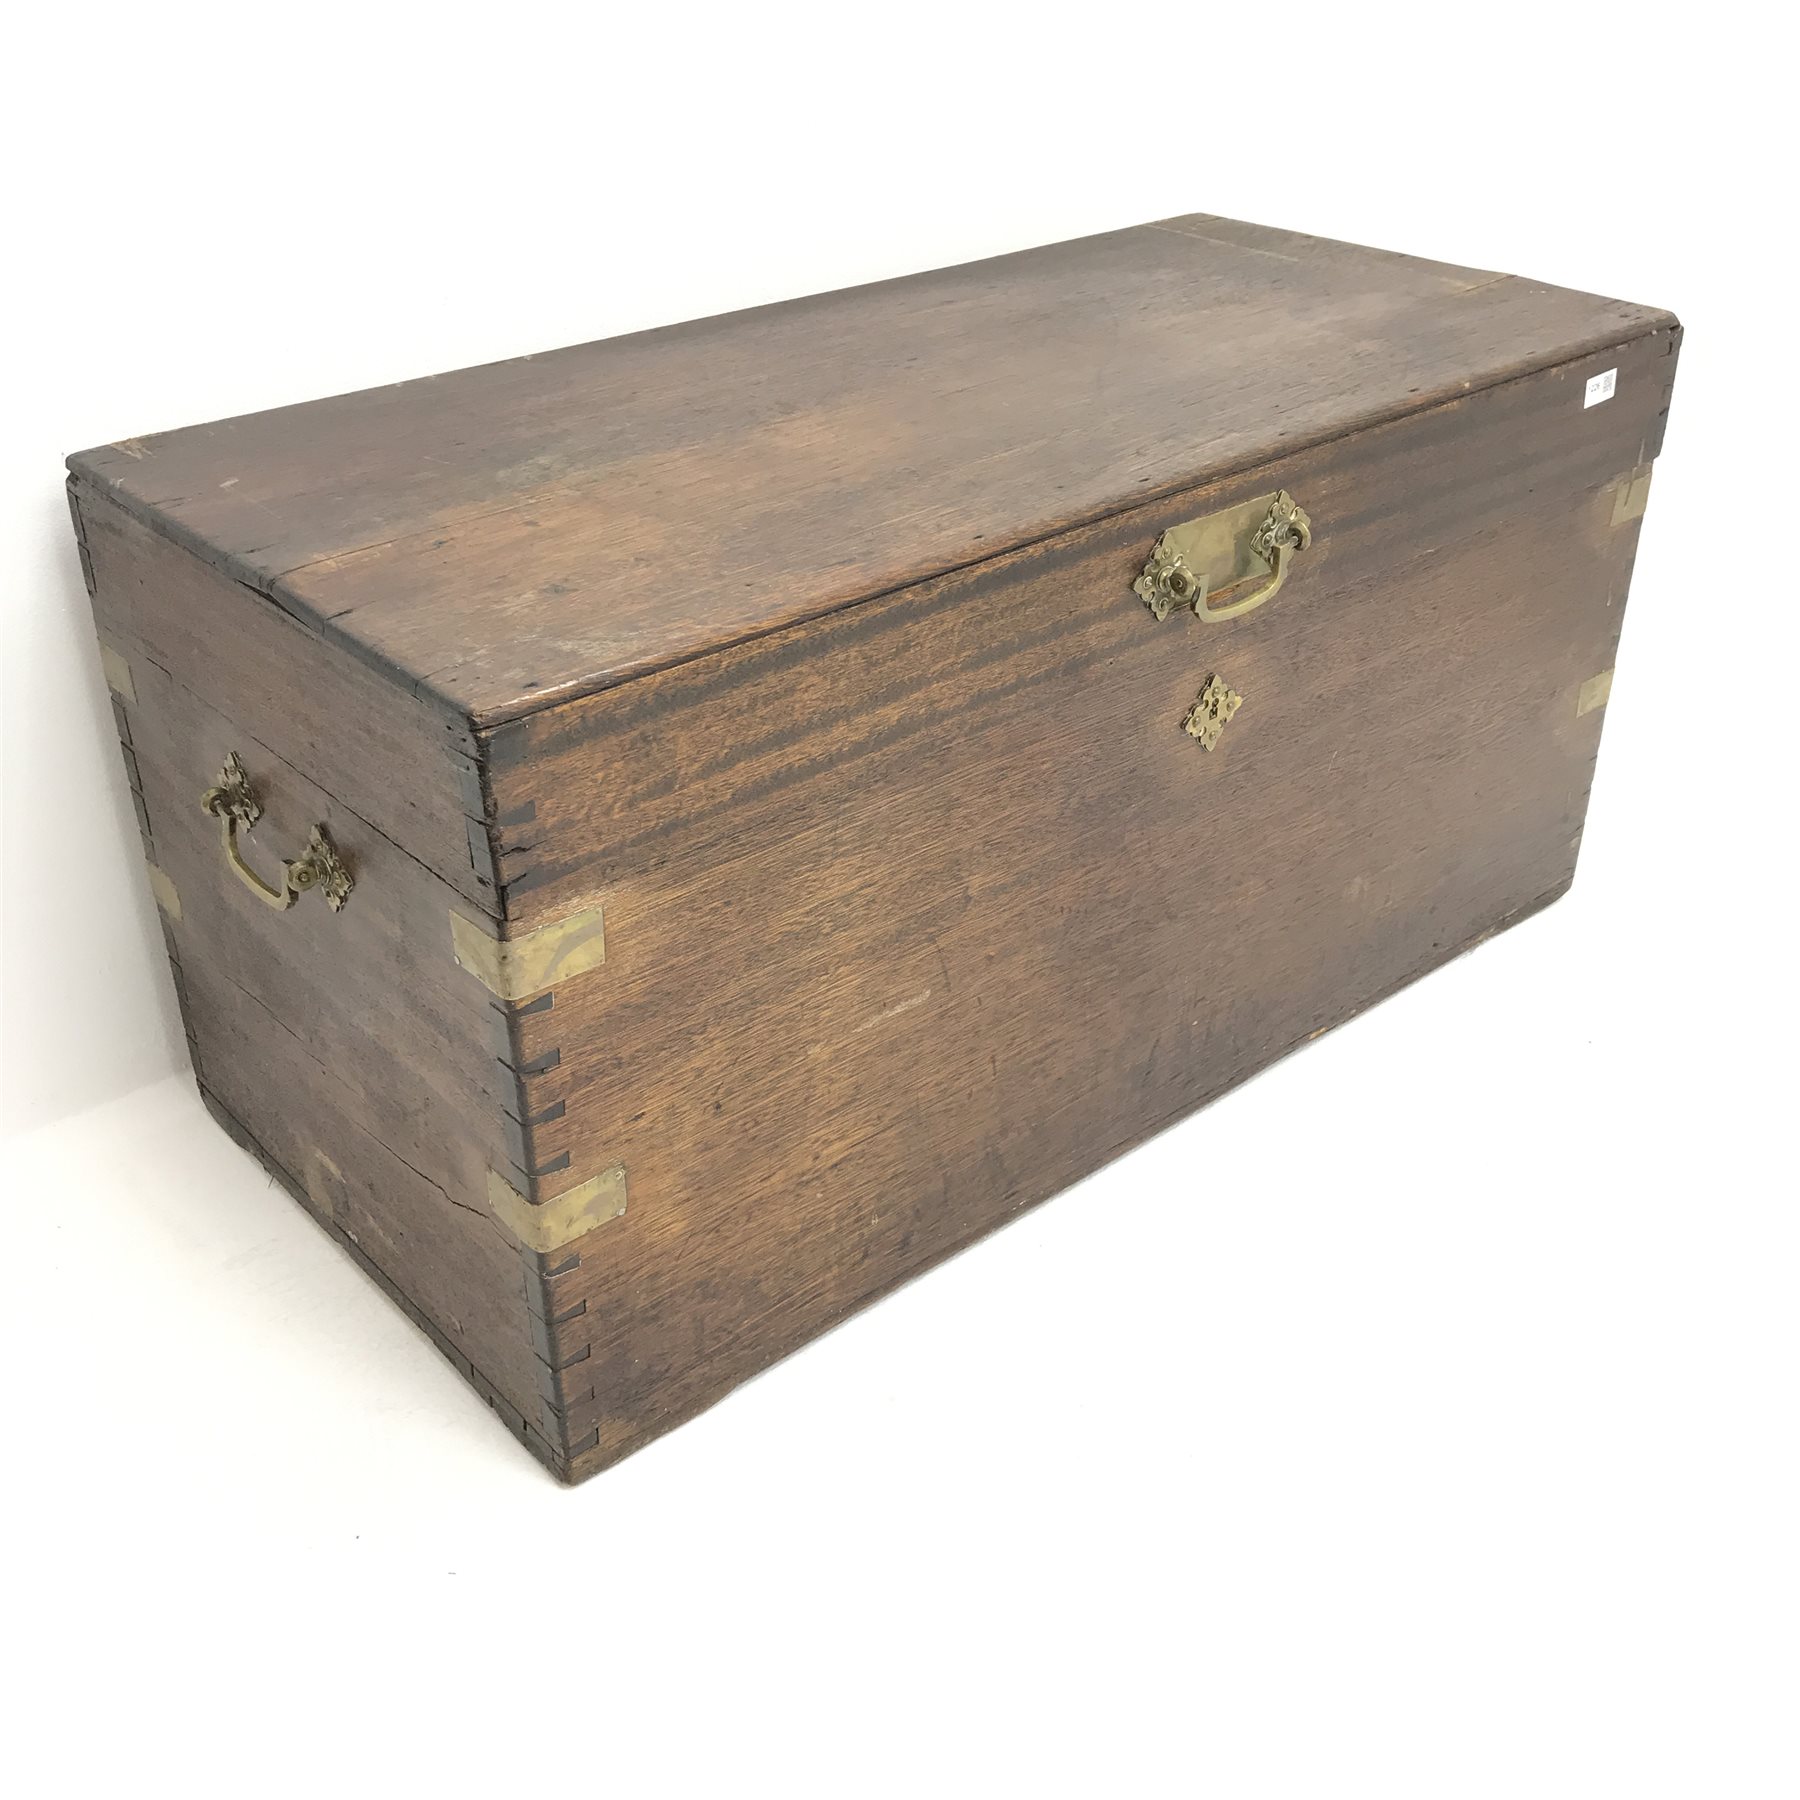 Early 20th century camphor wood chest, single hinged lid, brass strapping, W105cm, H51cm, D50cm - Image 2 of 3